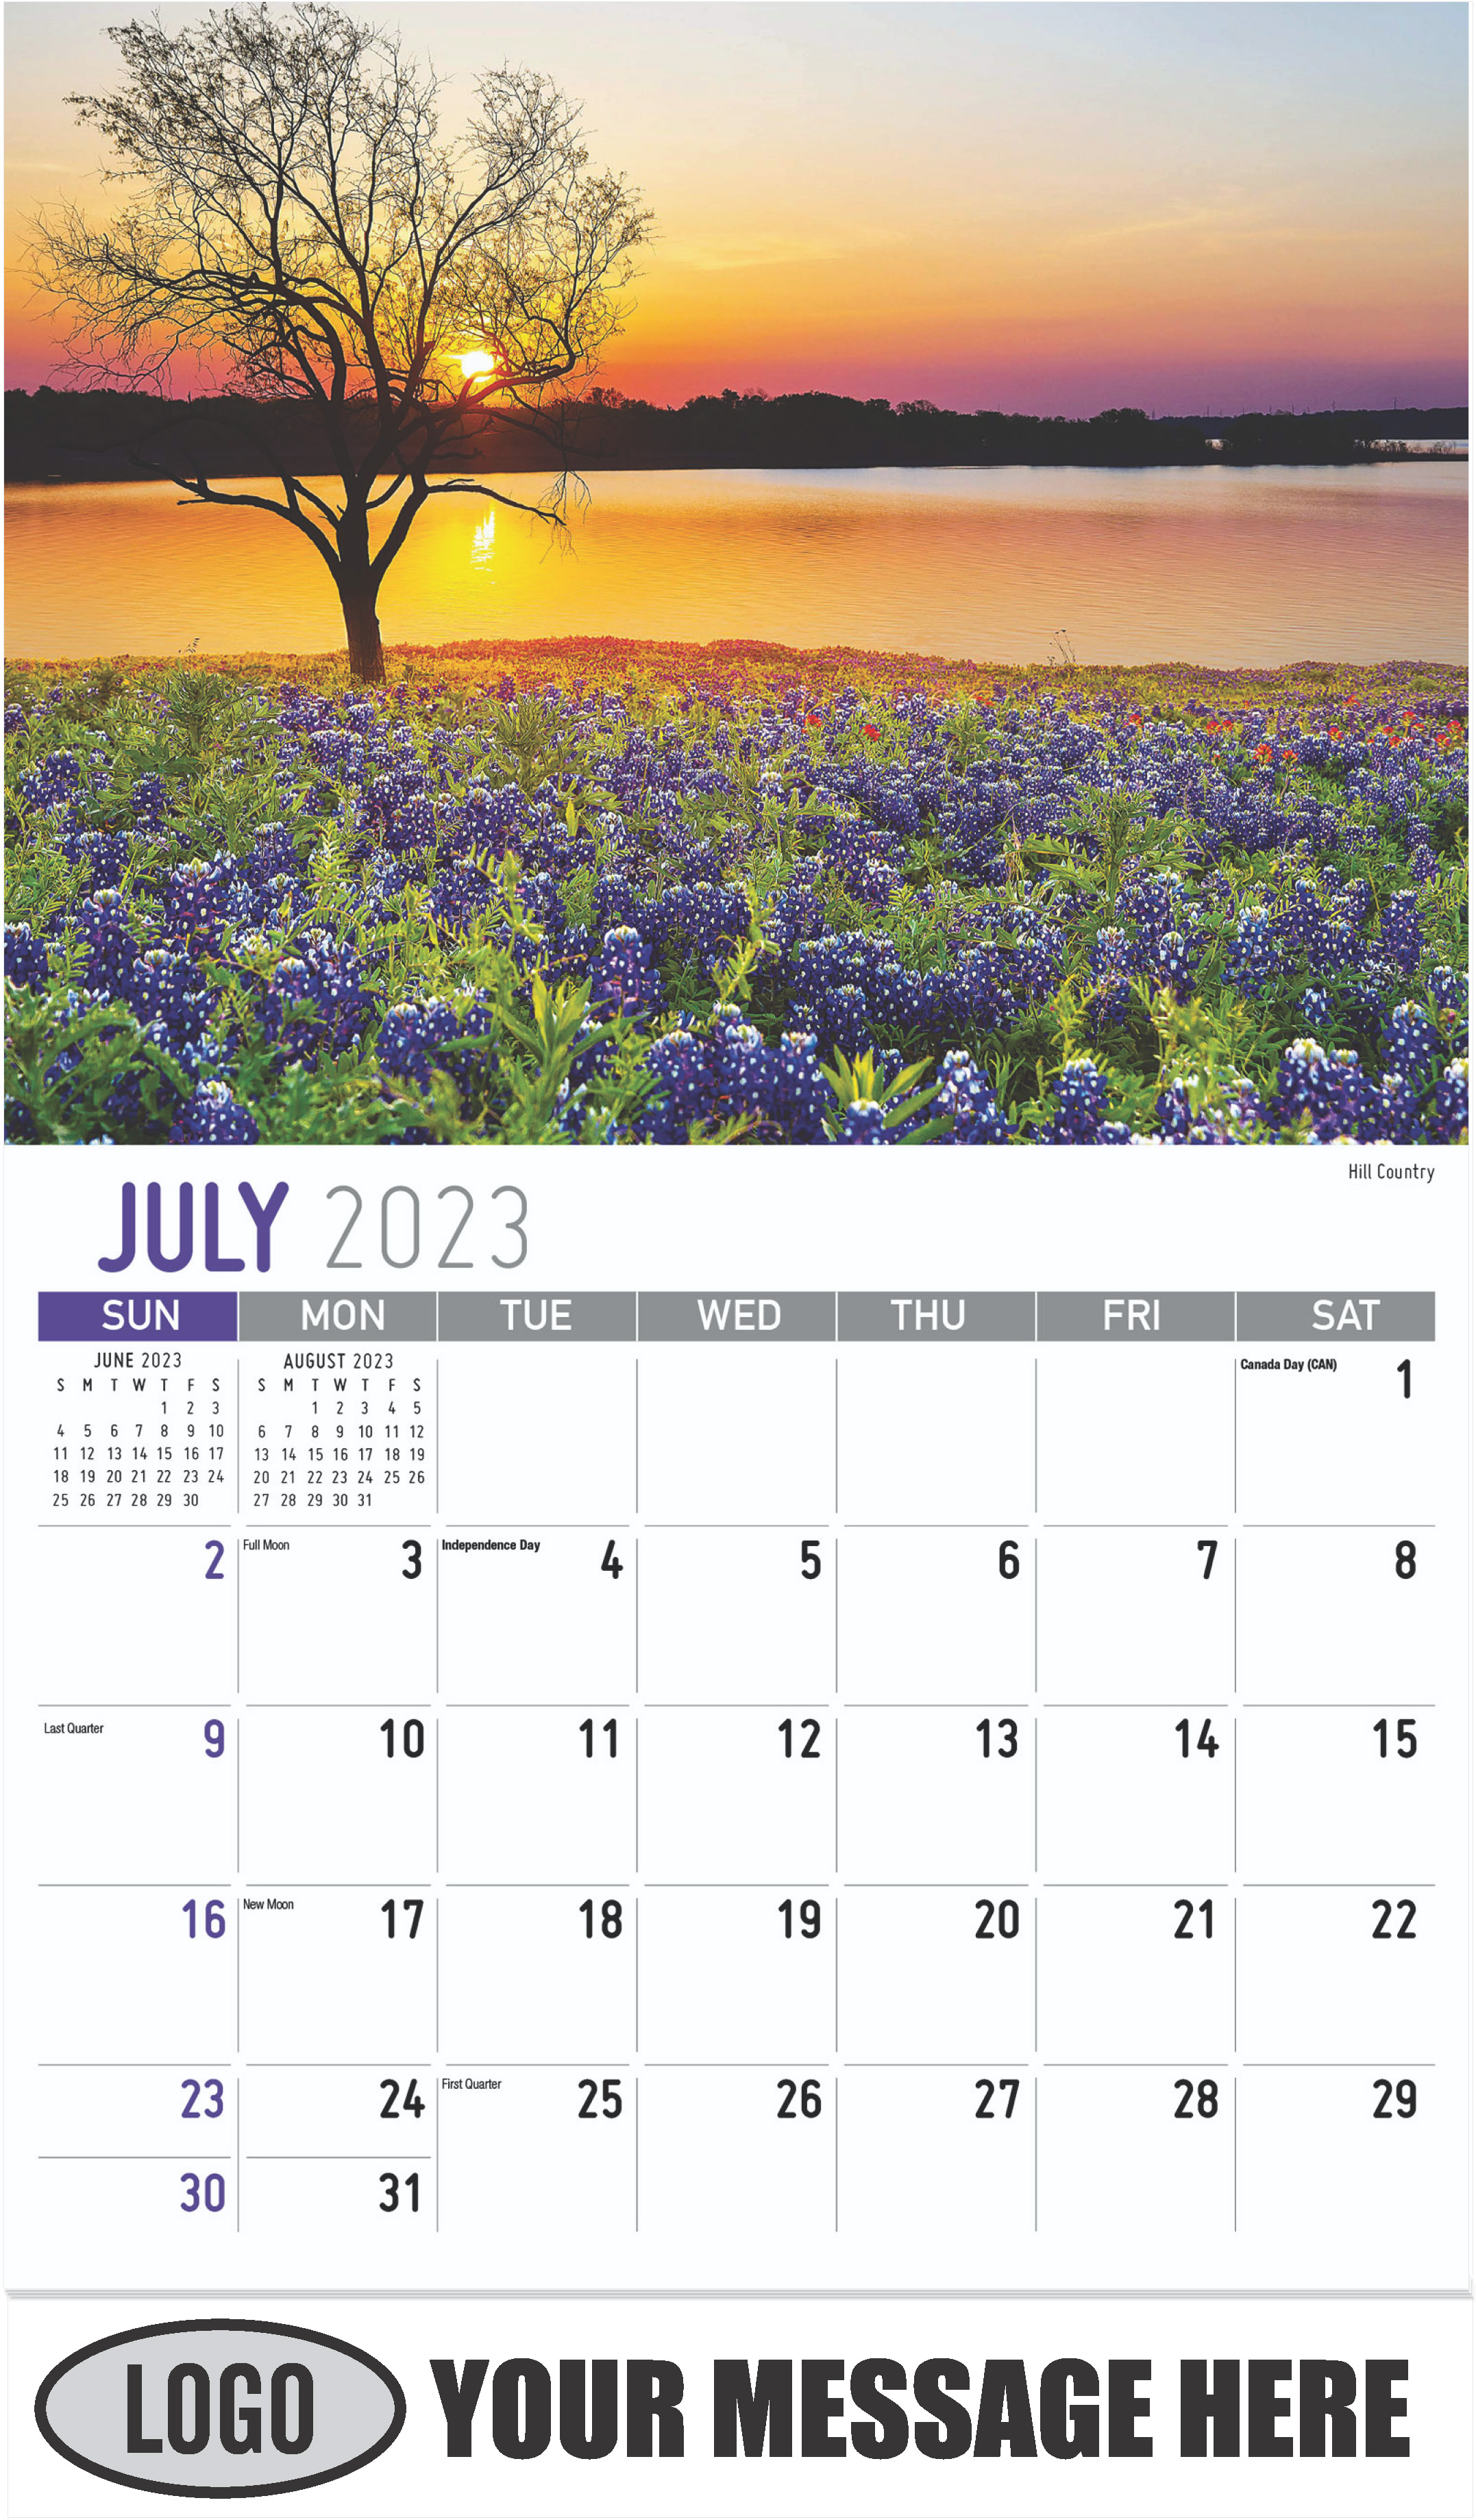 Hill Country - July - Scenes of Texas 2023 Promotional Calendar